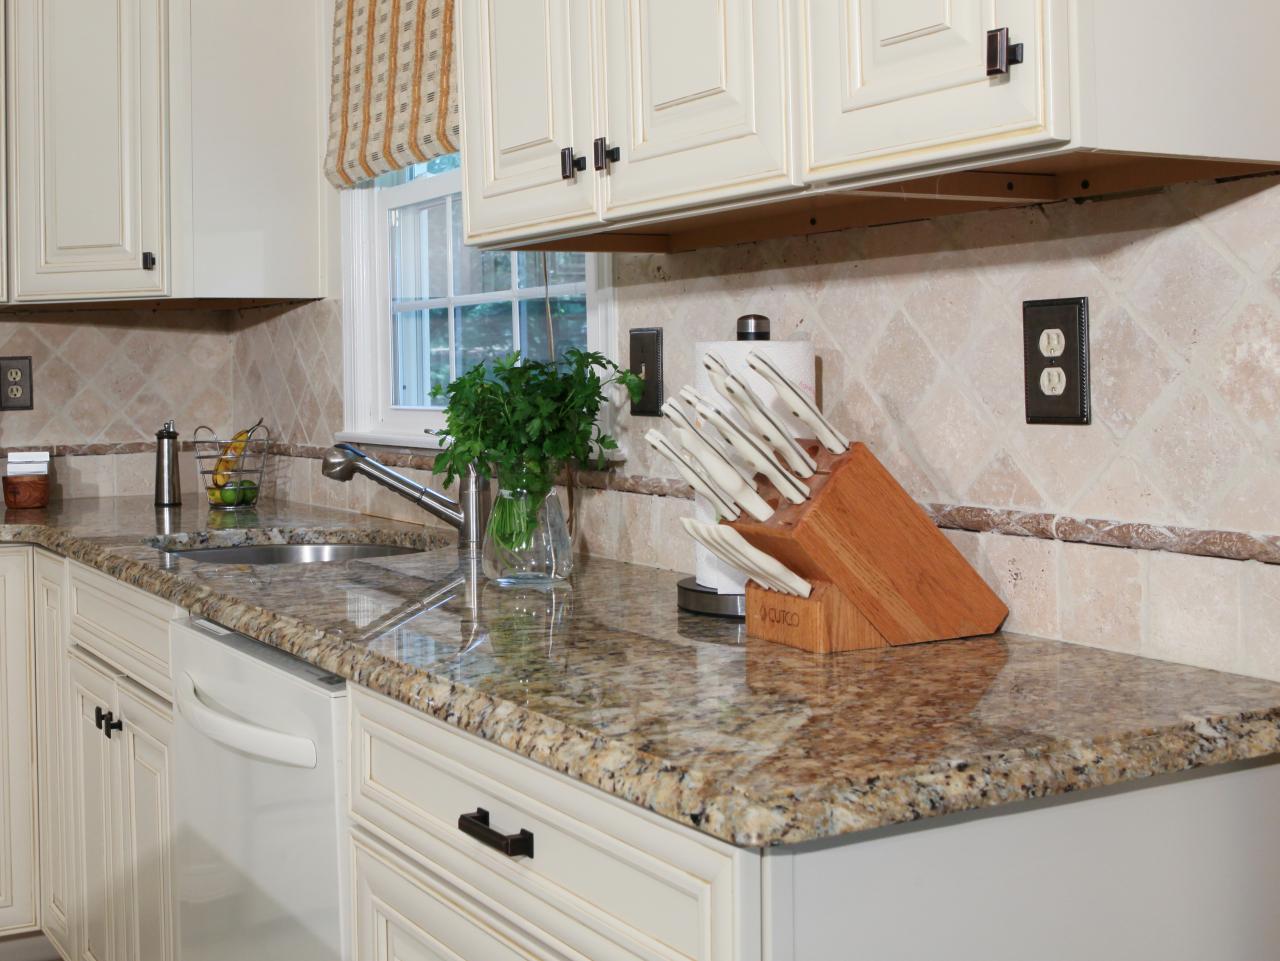 Why Granite is so popular for Countertops?